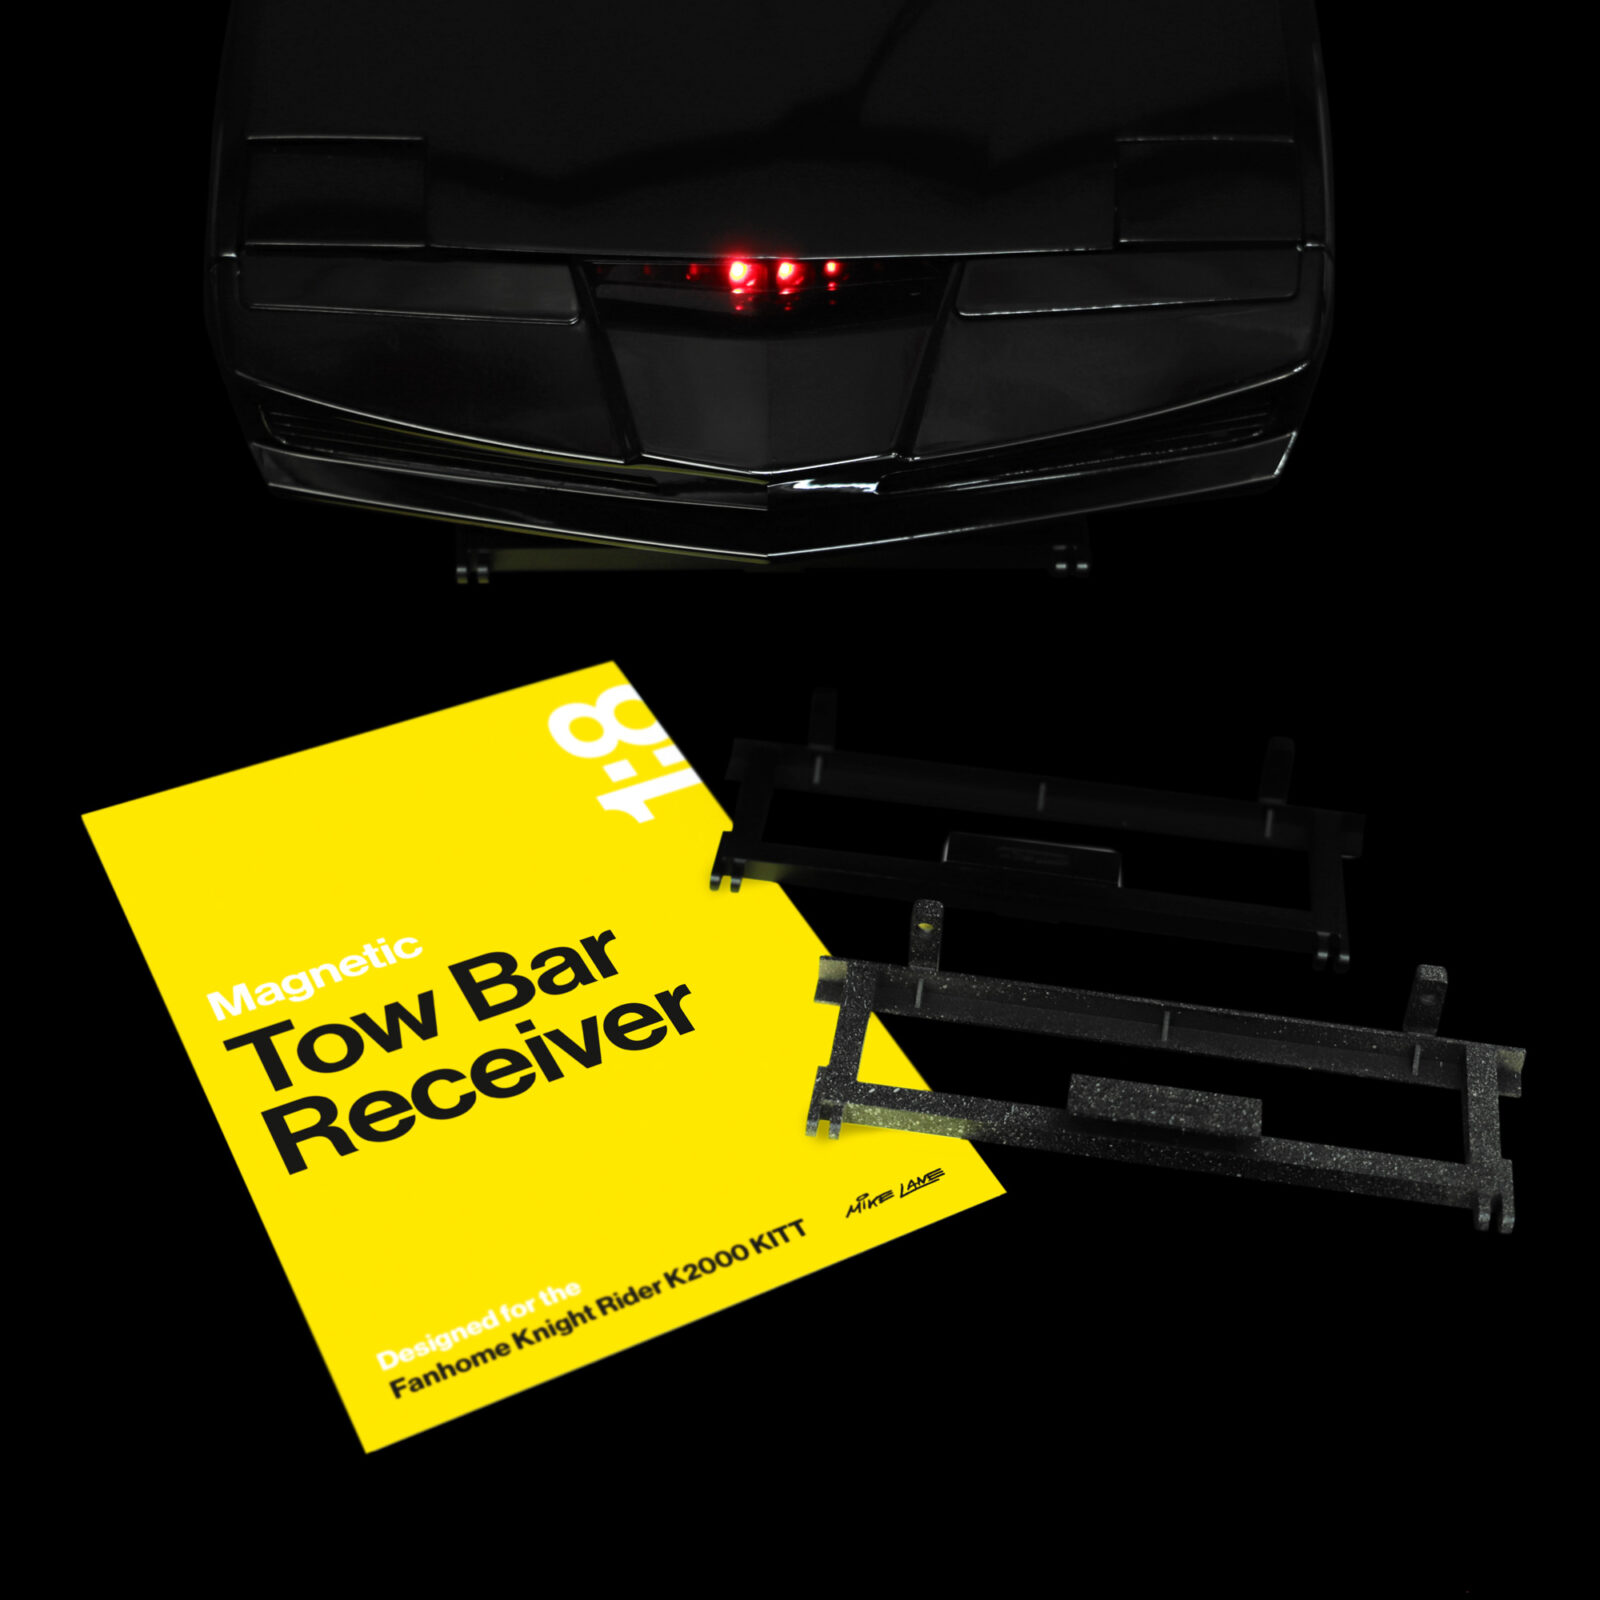 Magnetic tow bar receiver contents and seen installed on KITT model